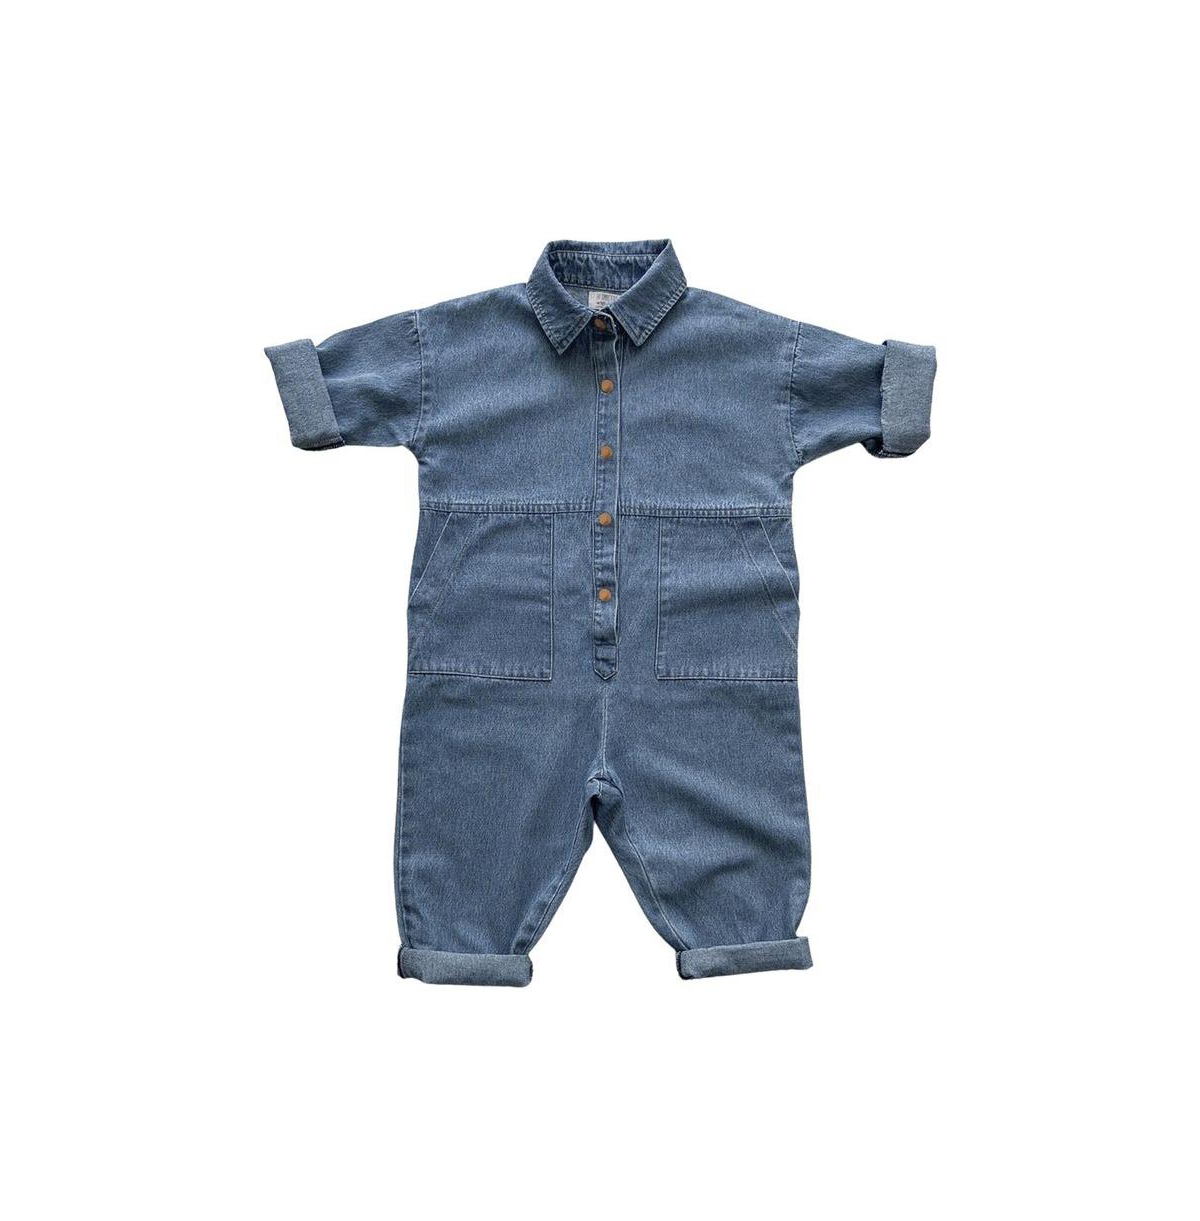 THE SIMPLE FOLK BABY BOY AND BABY GIRL COTTON DENIM BOILER SUIT